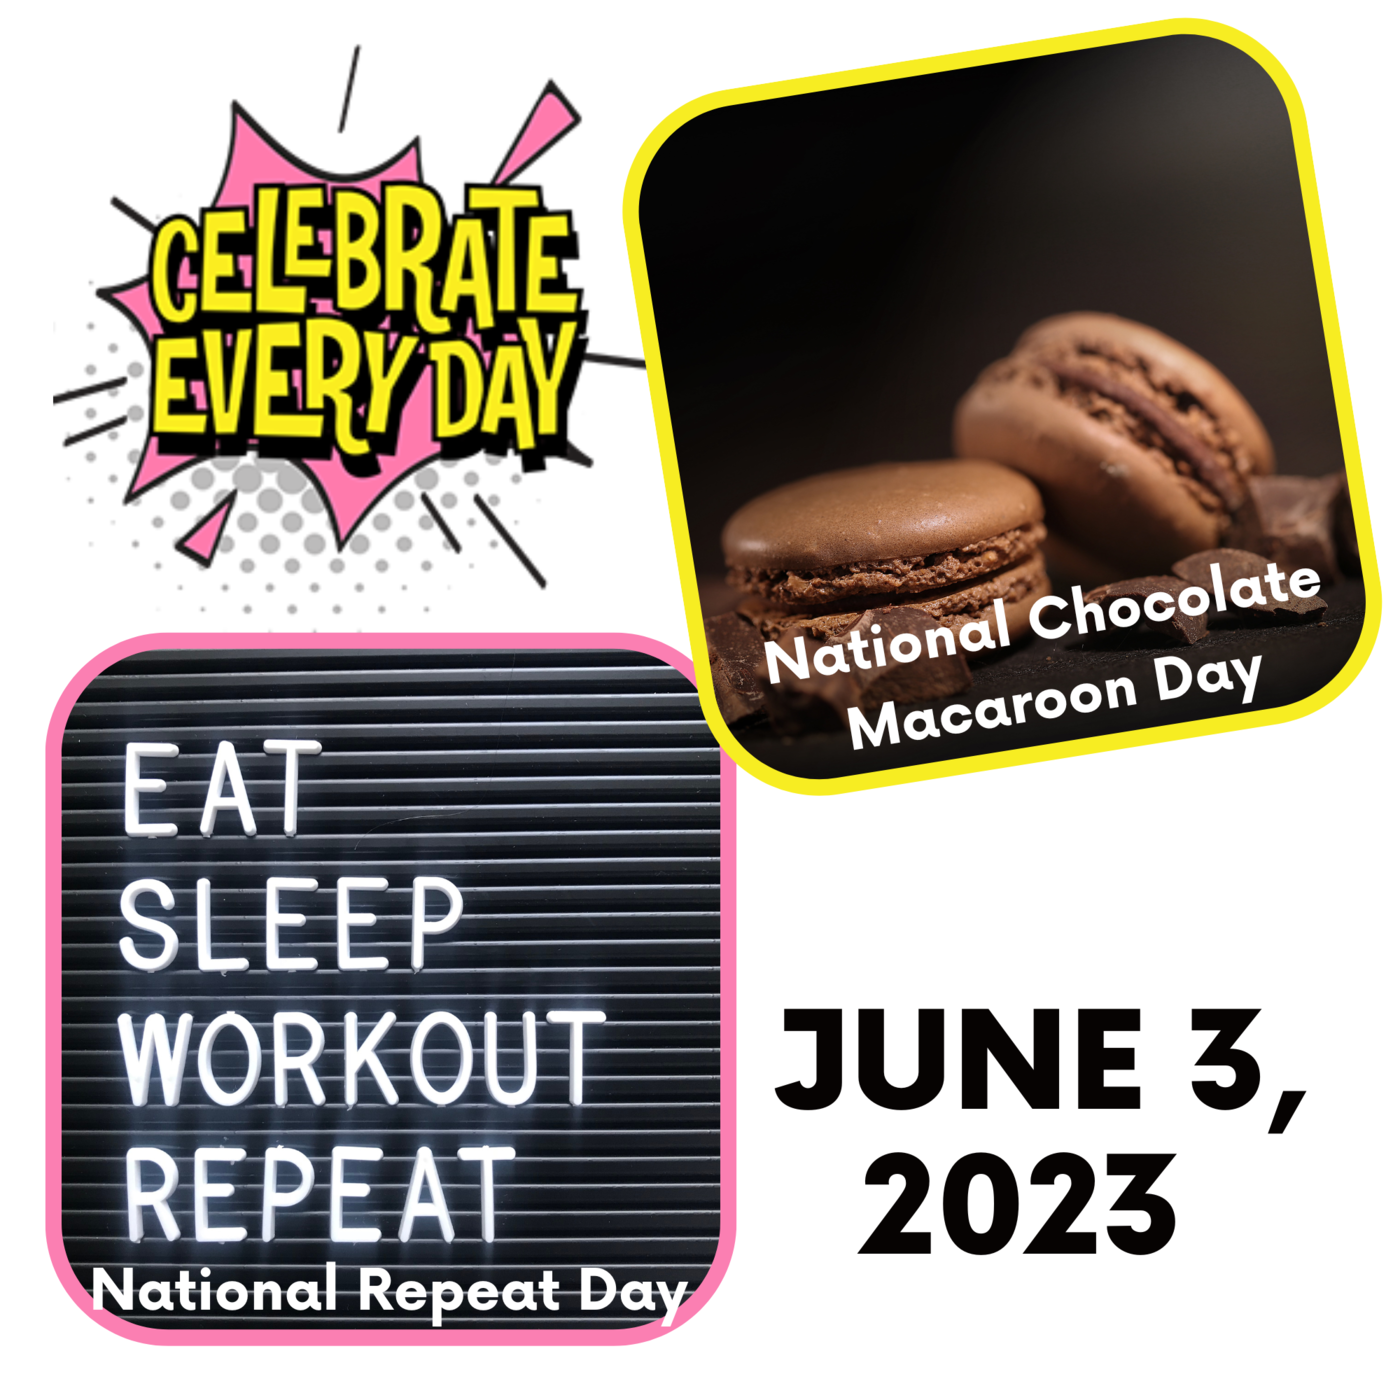 June 3, 2023 - National Repeat Day | National Chocolate Macaroon Day Image